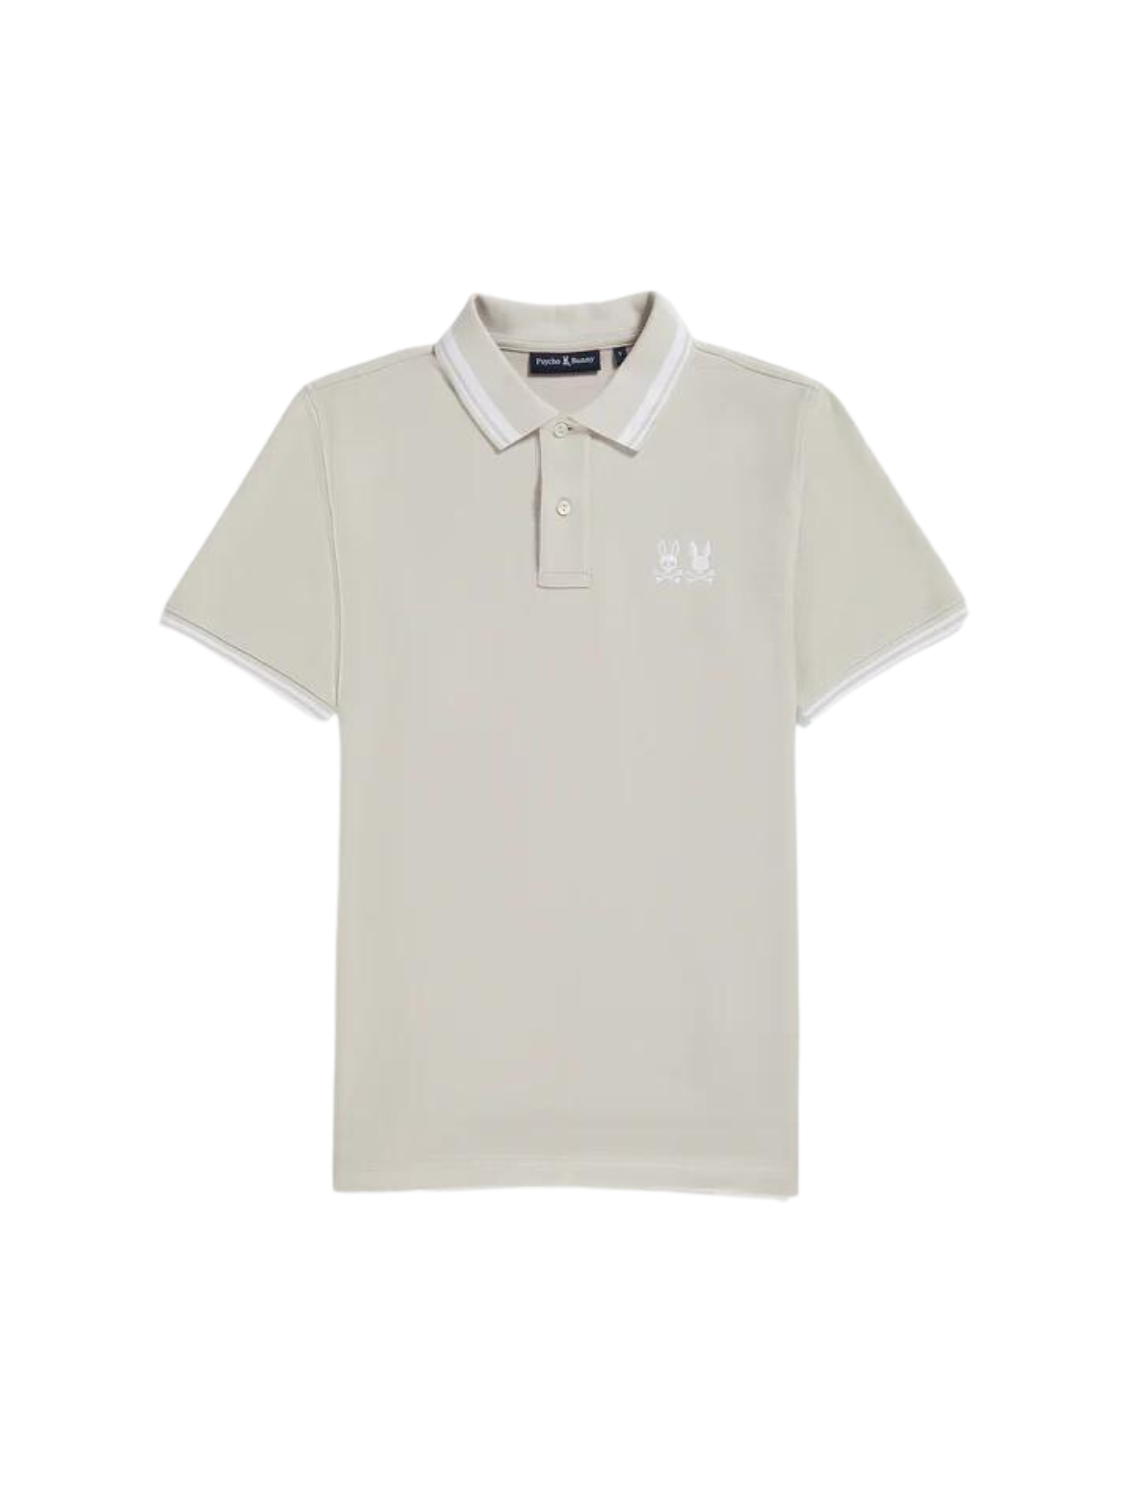 men's Kingwood piqué polo with an embroidered twin Bunny logo on the chest